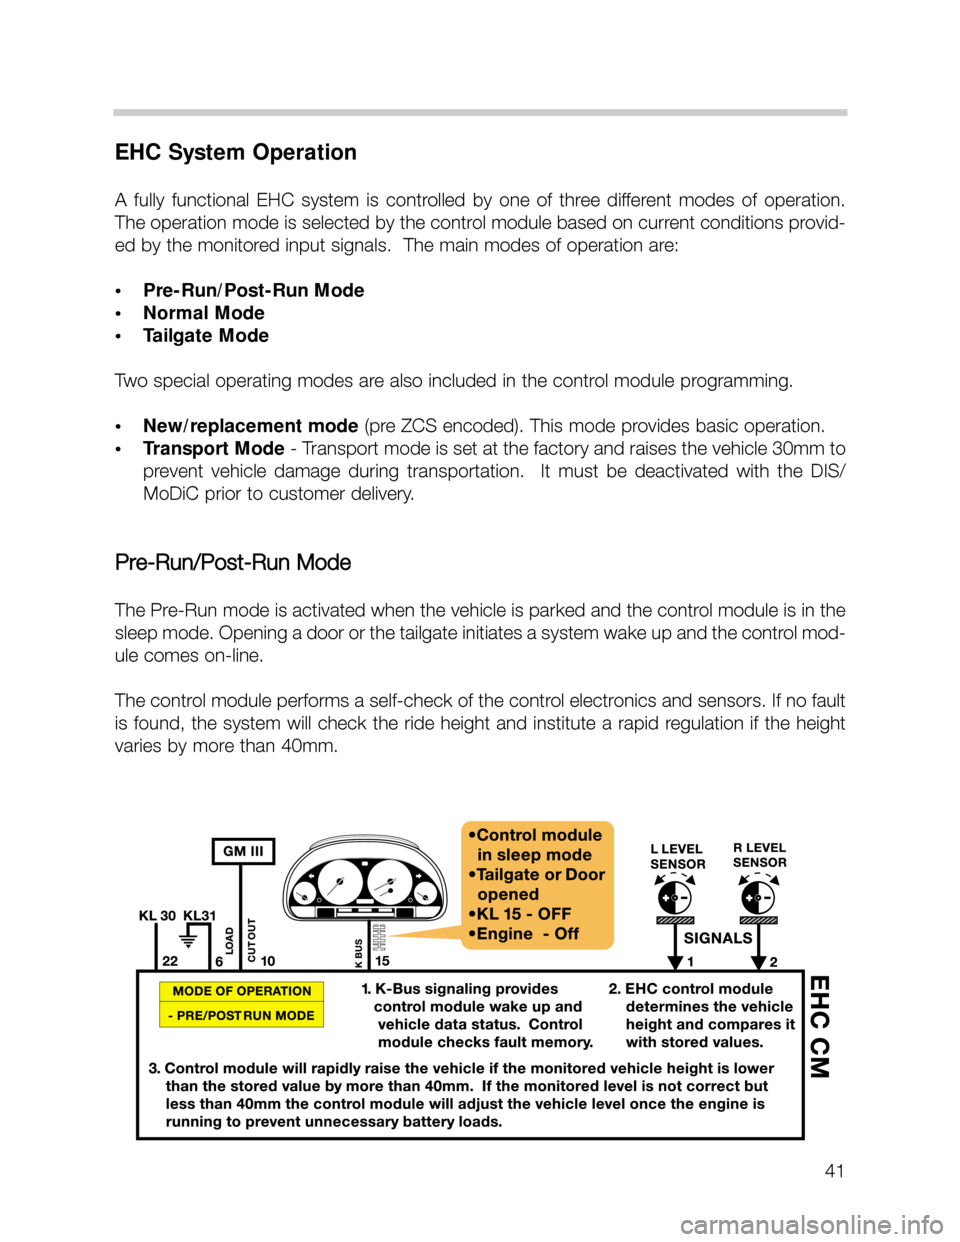 BMW X5 1999 E53 Workshop Manual 41
EHC System Operation
A  fully  functional  EHC  system  is  controlled  by  one  of  three  different  modes  of  operation.
The operation mode is selected by the control module based on current co